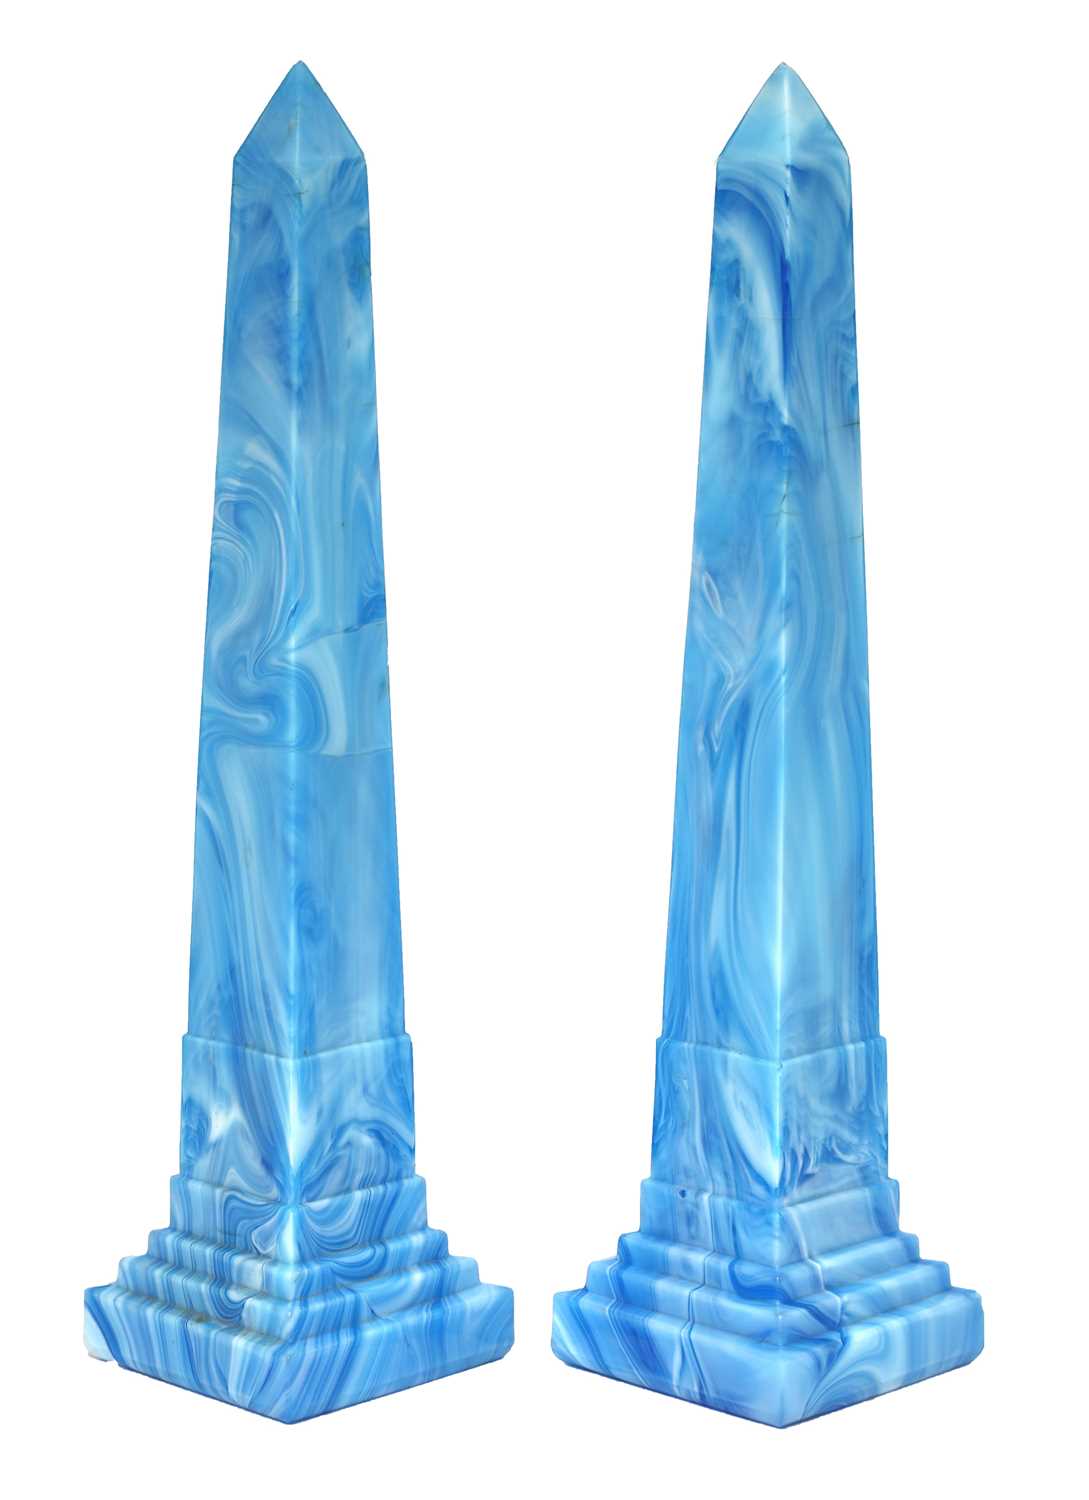 A pair of glass obelisks attributed to Sowerby Glassworks,